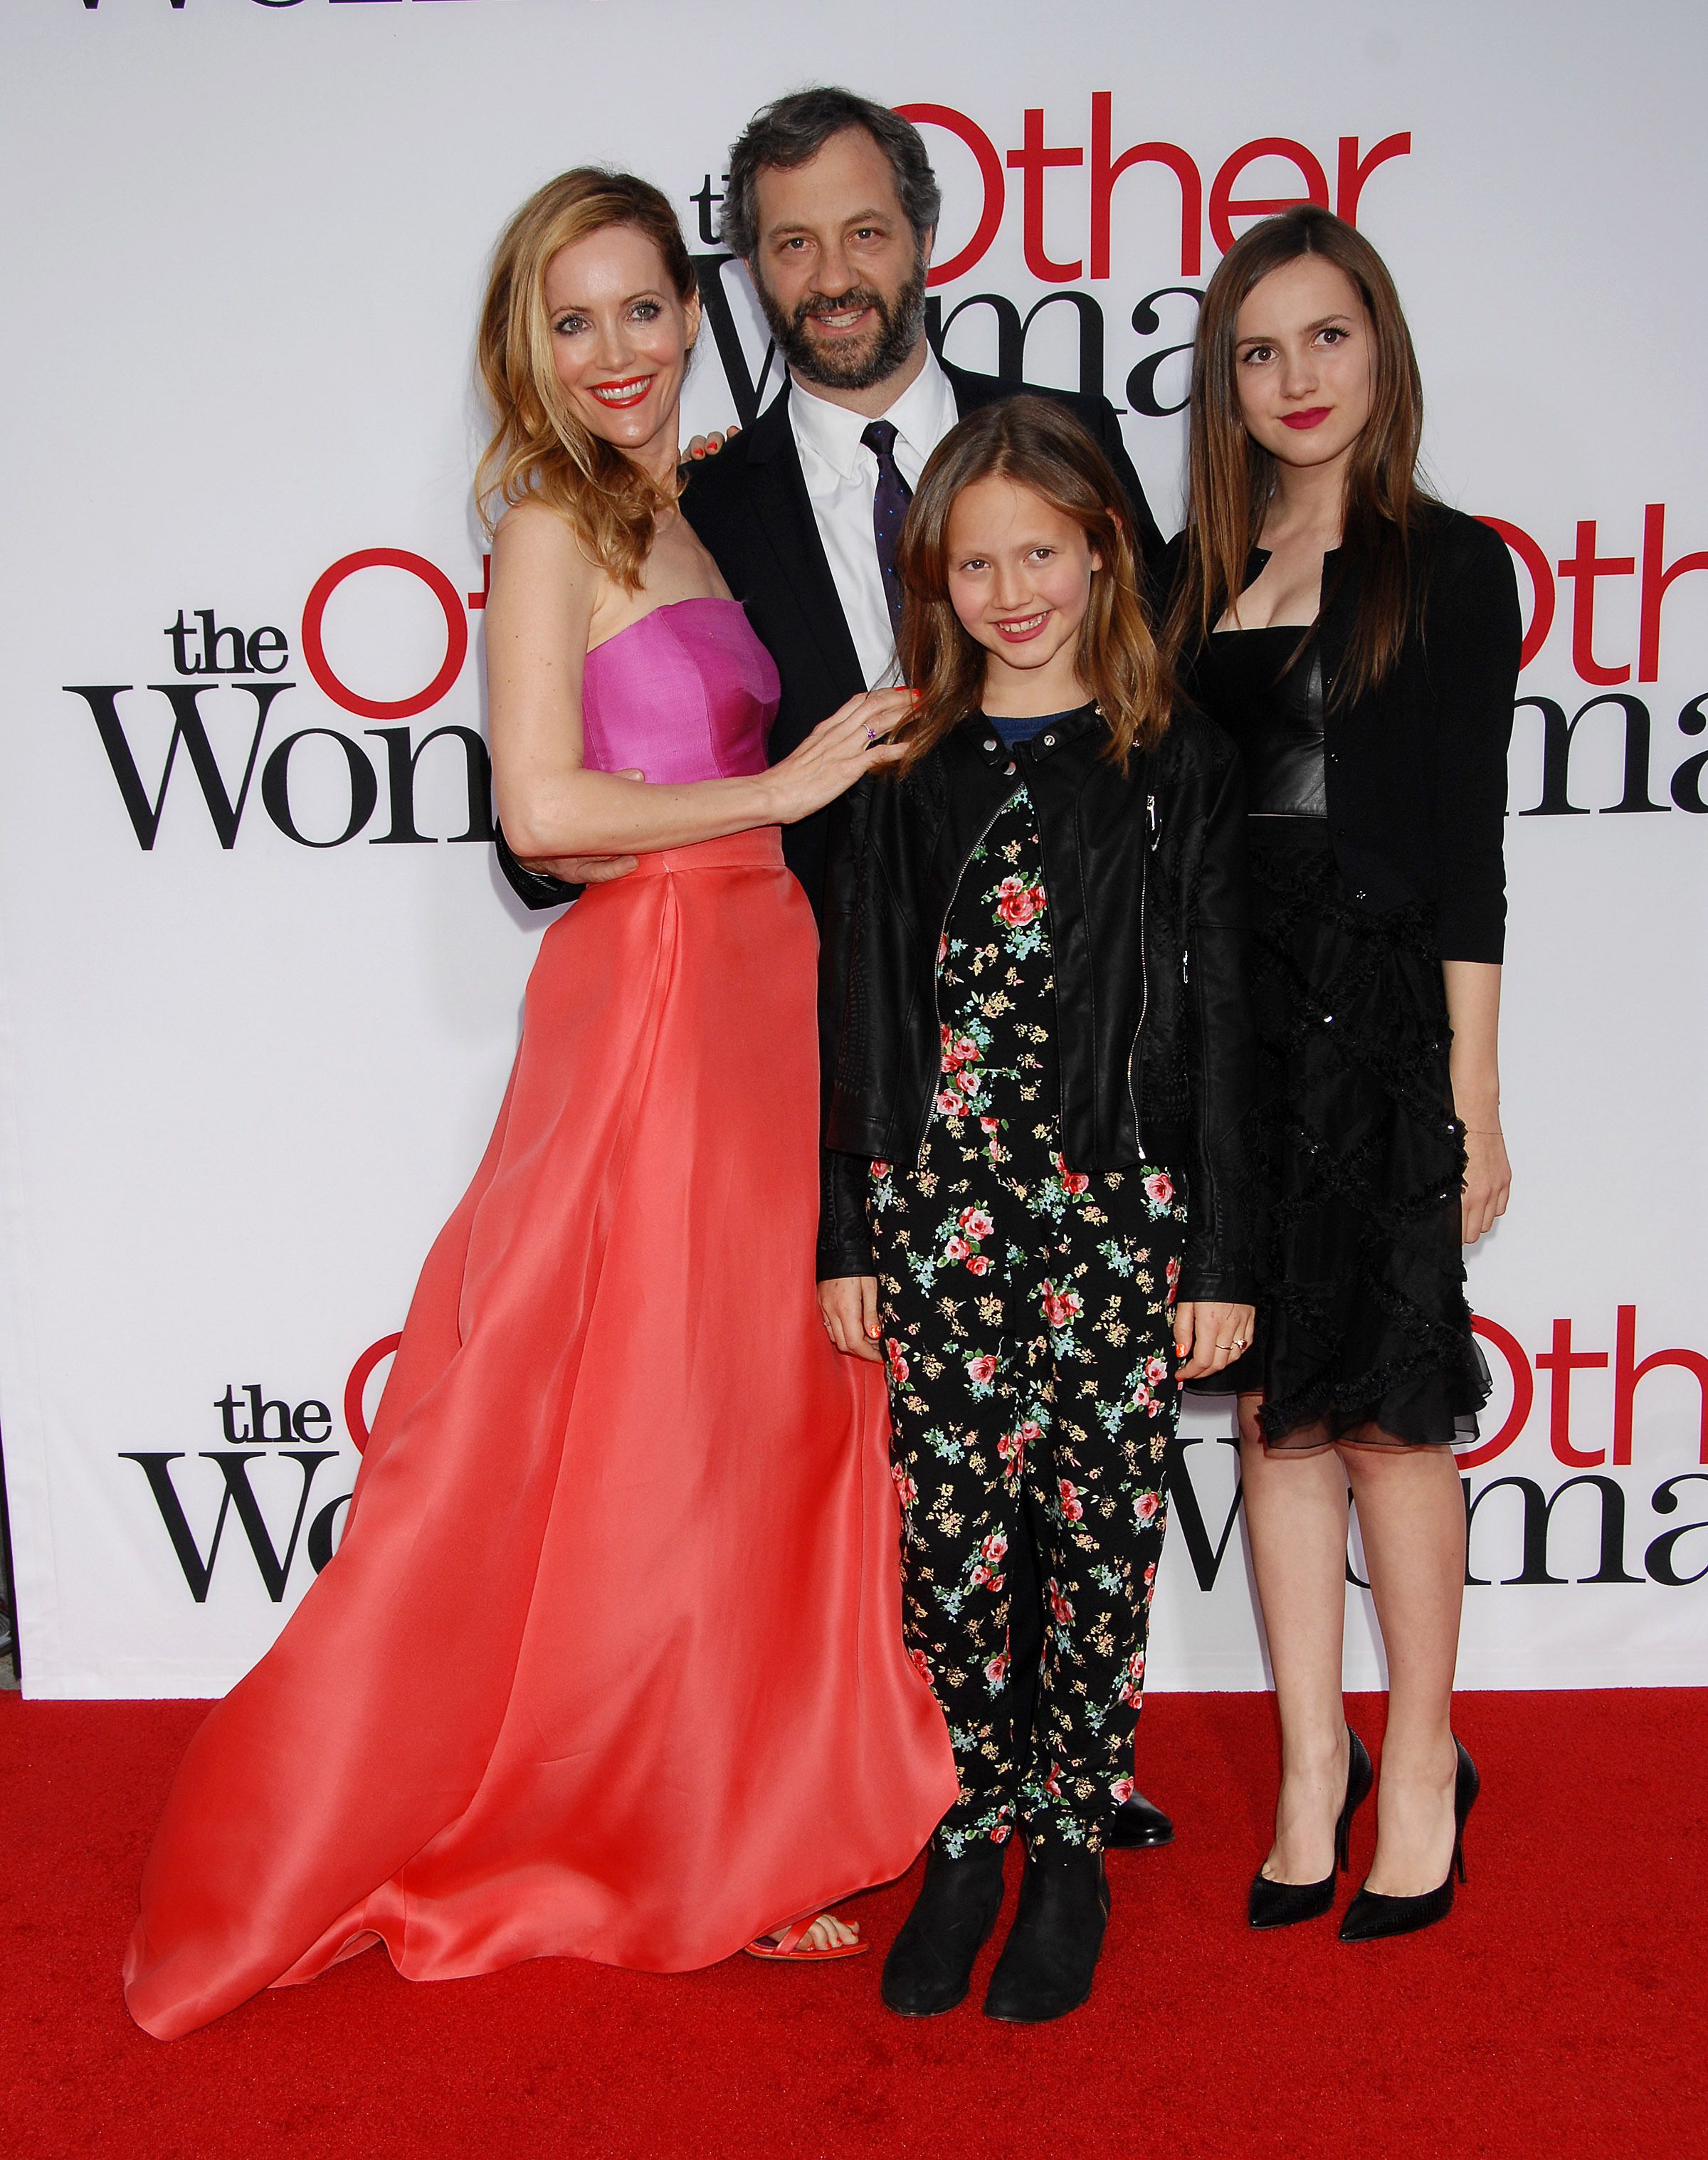 Leslie Mann, Judd Apatow, daughters Maude and Iris